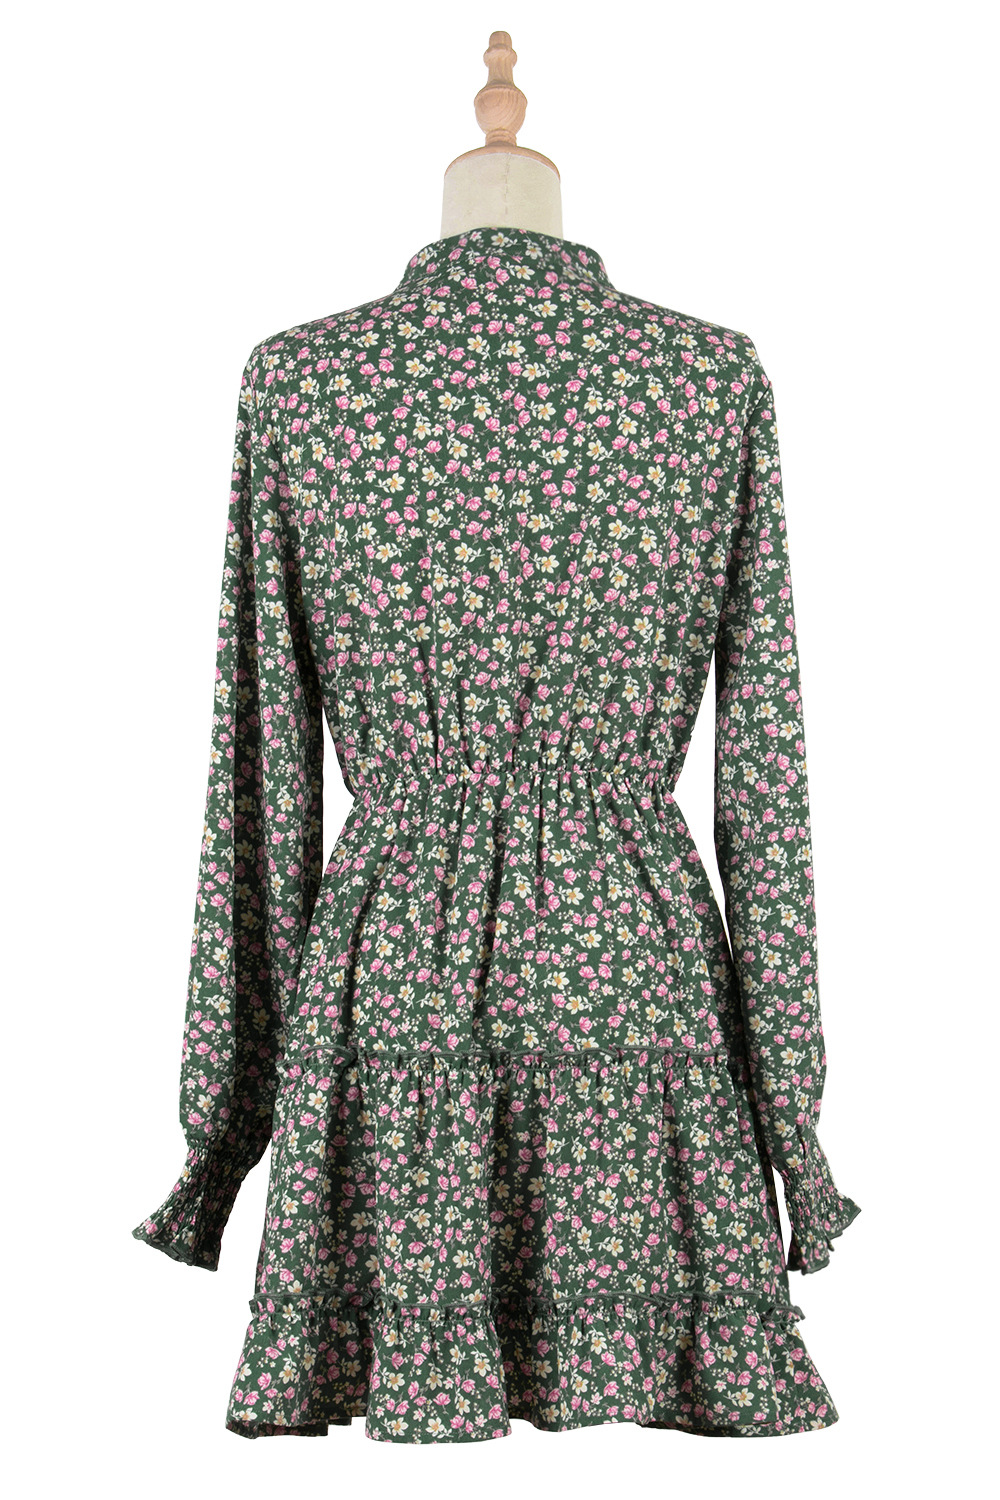 Pinched waist European style floral dress for women